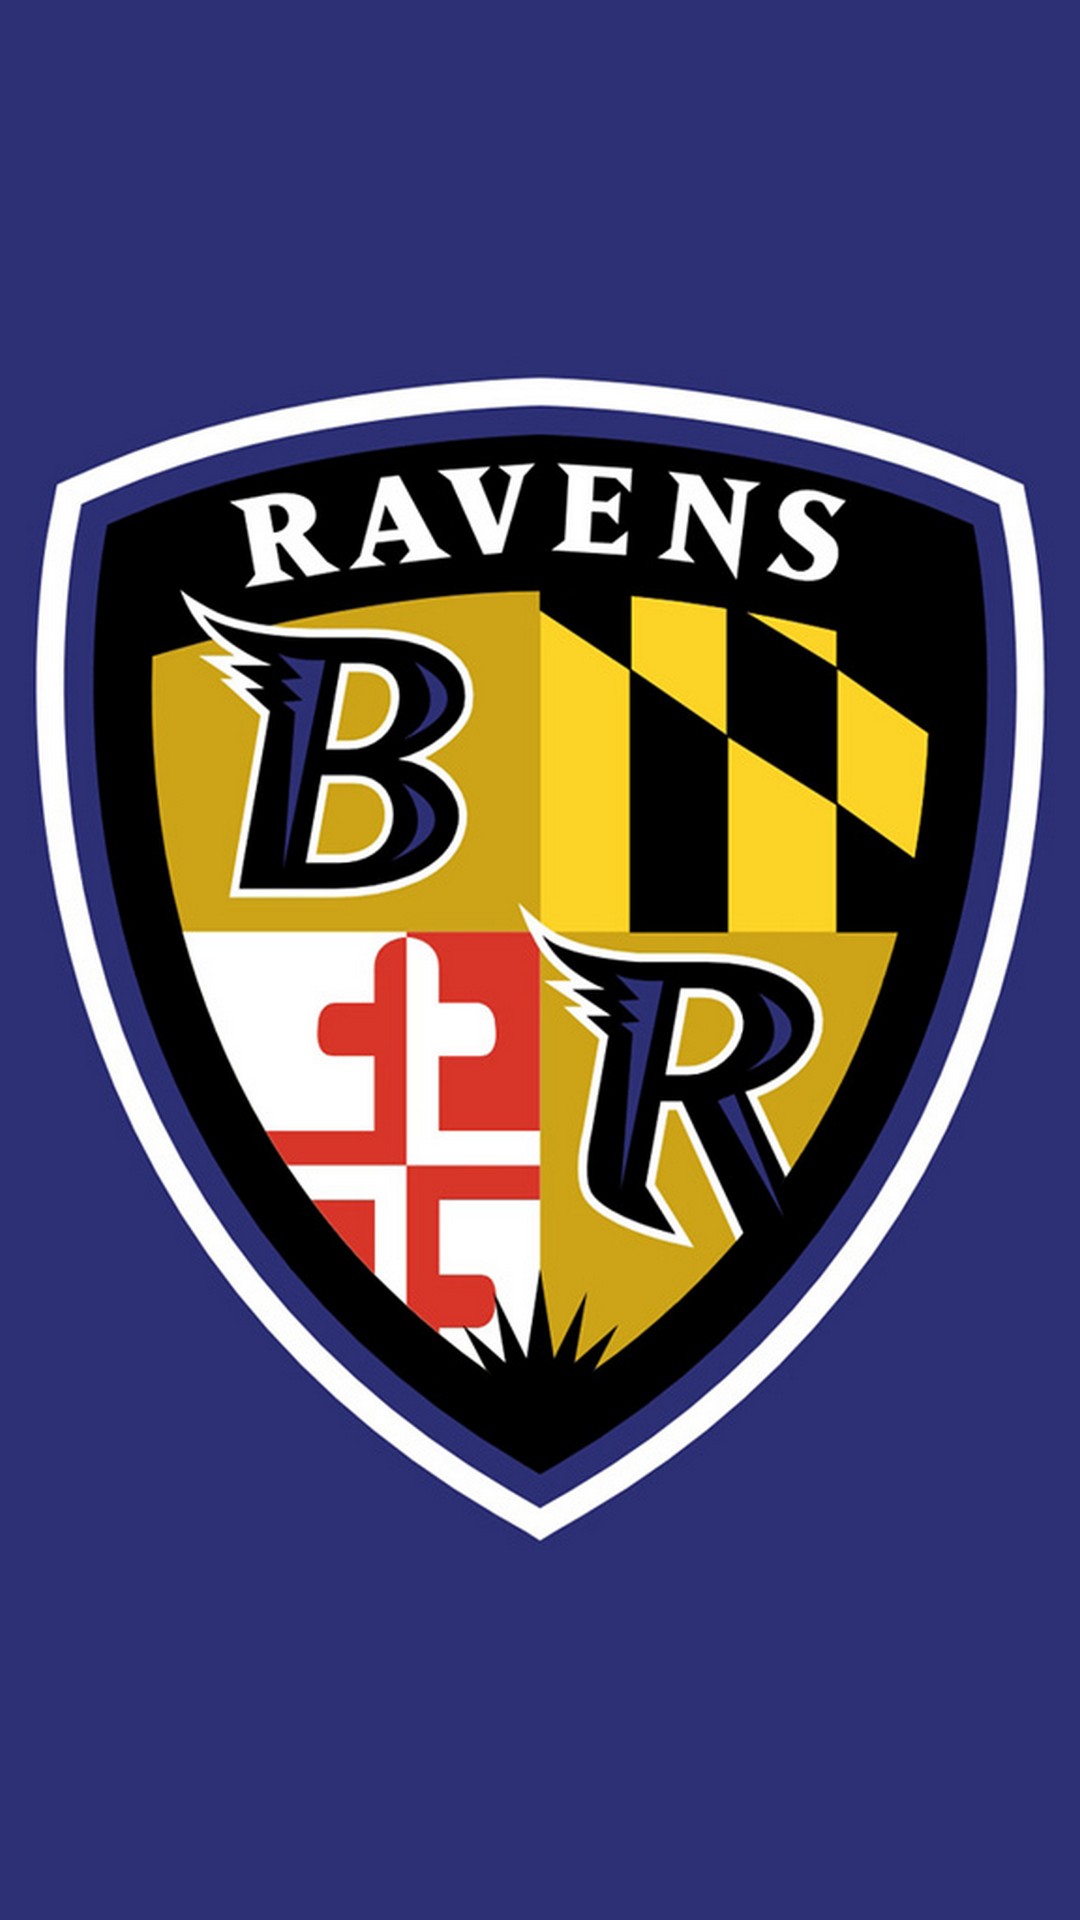 Baltimore Ravens iPhone X Wallpaper with high-resolution 1080x1920 pixel. Download and set as wallpaper for Apple iPhone X, XS Max, XR, 8, 7, 6, SE, iPad, Android